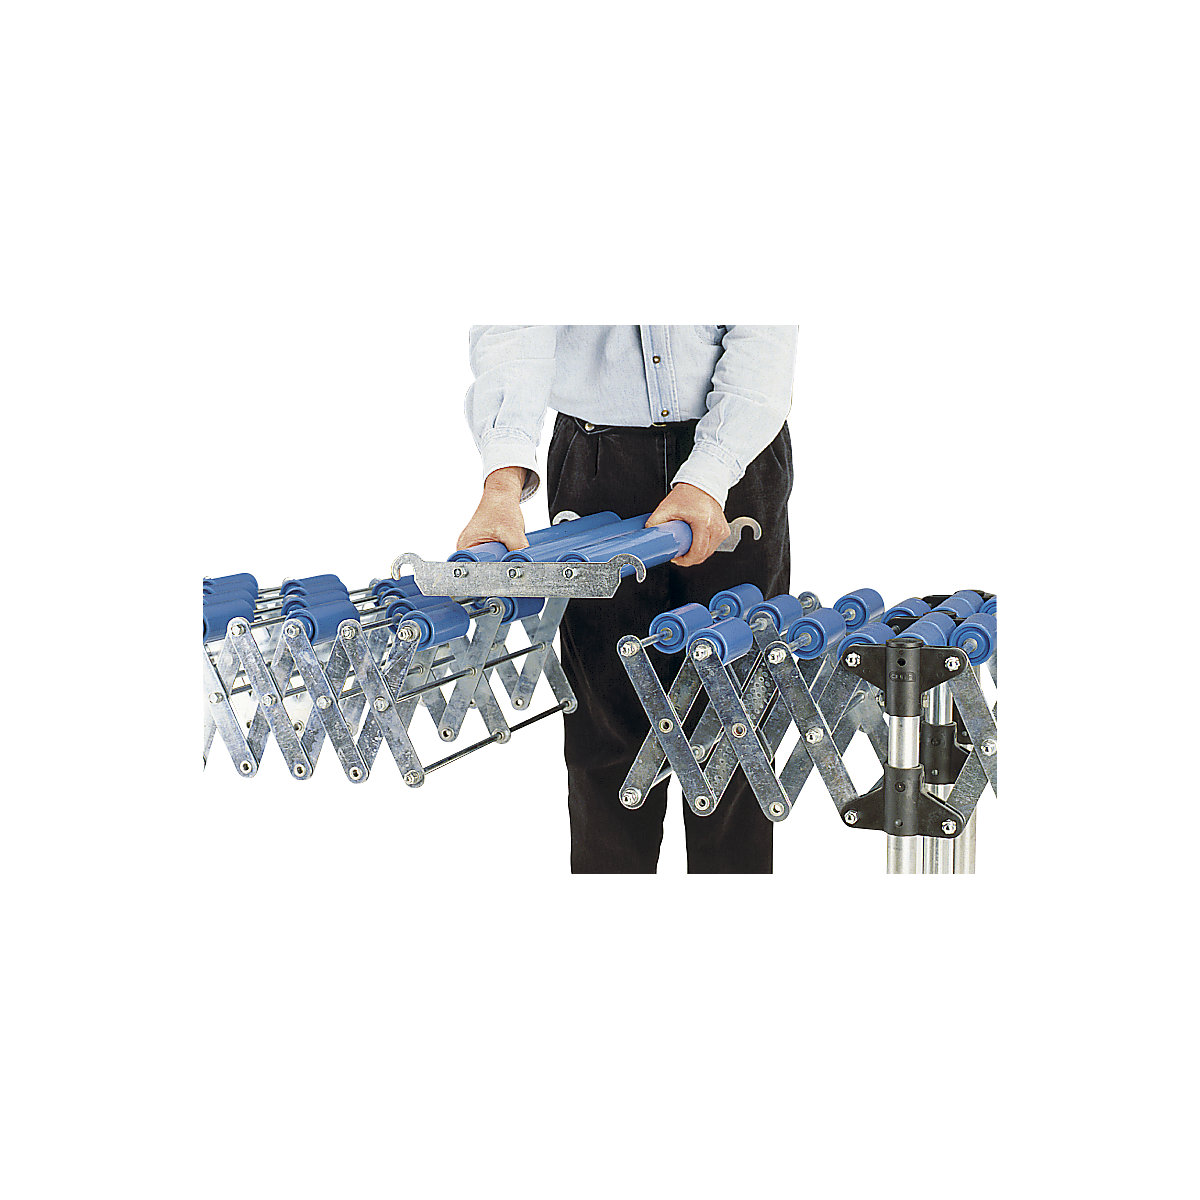 Connecting element for roller conveyor – Gura